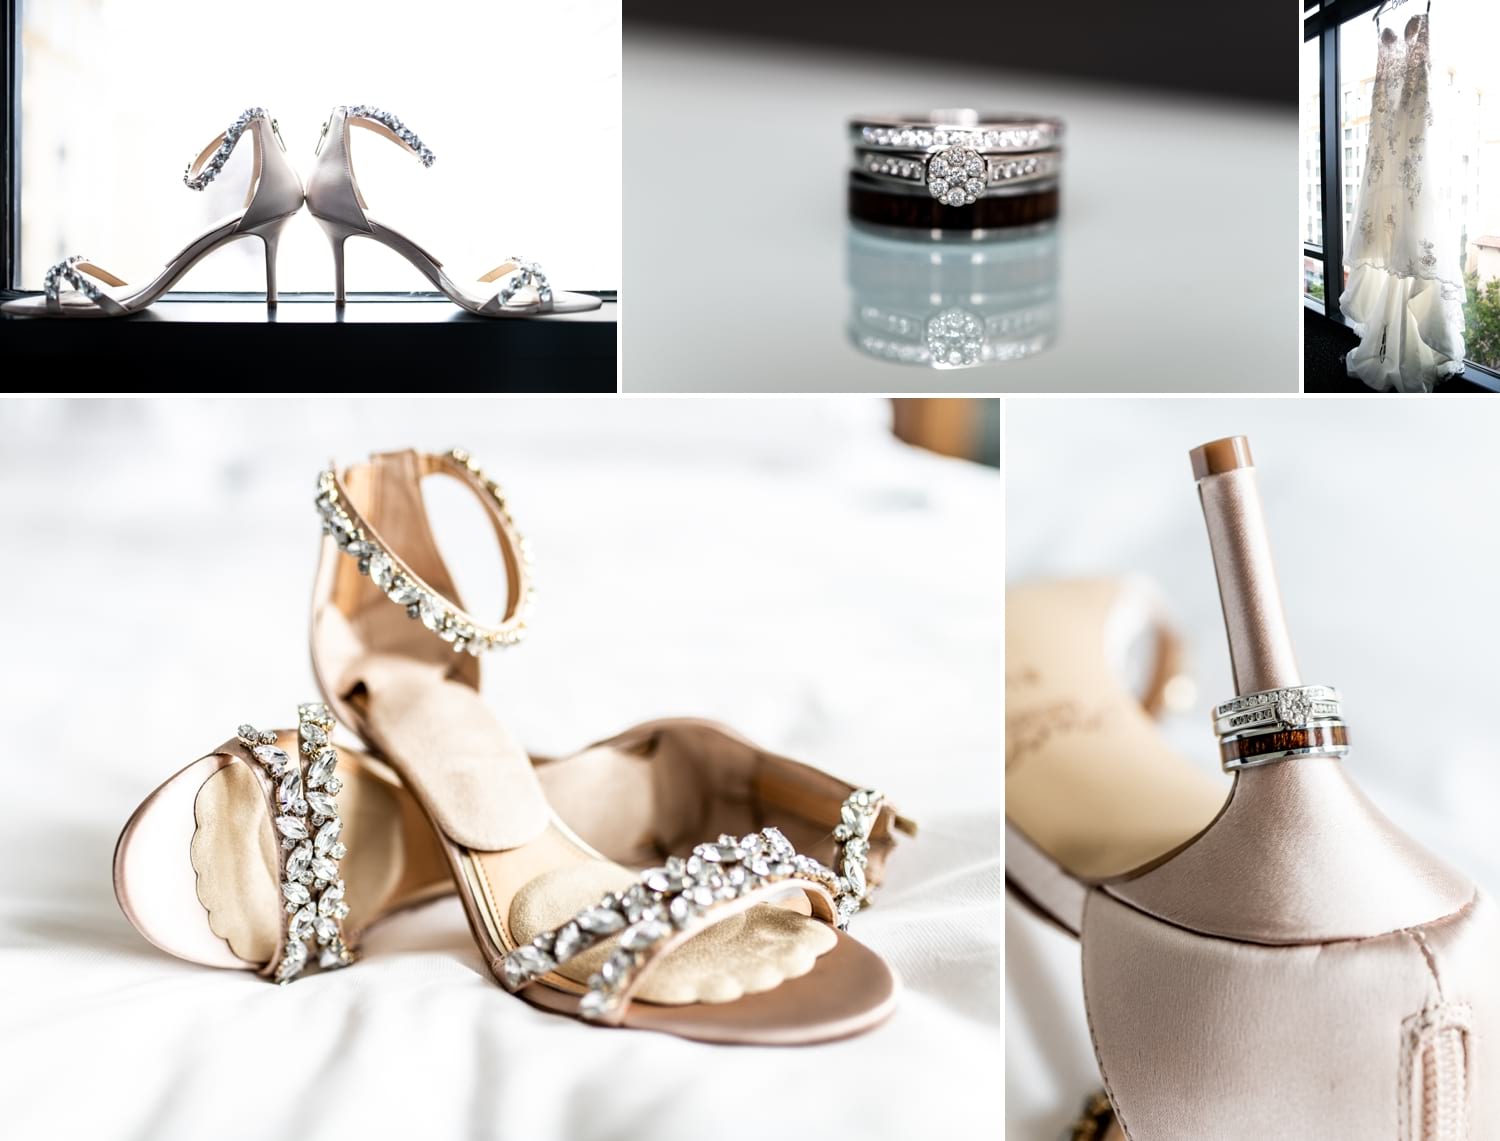 Bride's shoes, dress and ring.